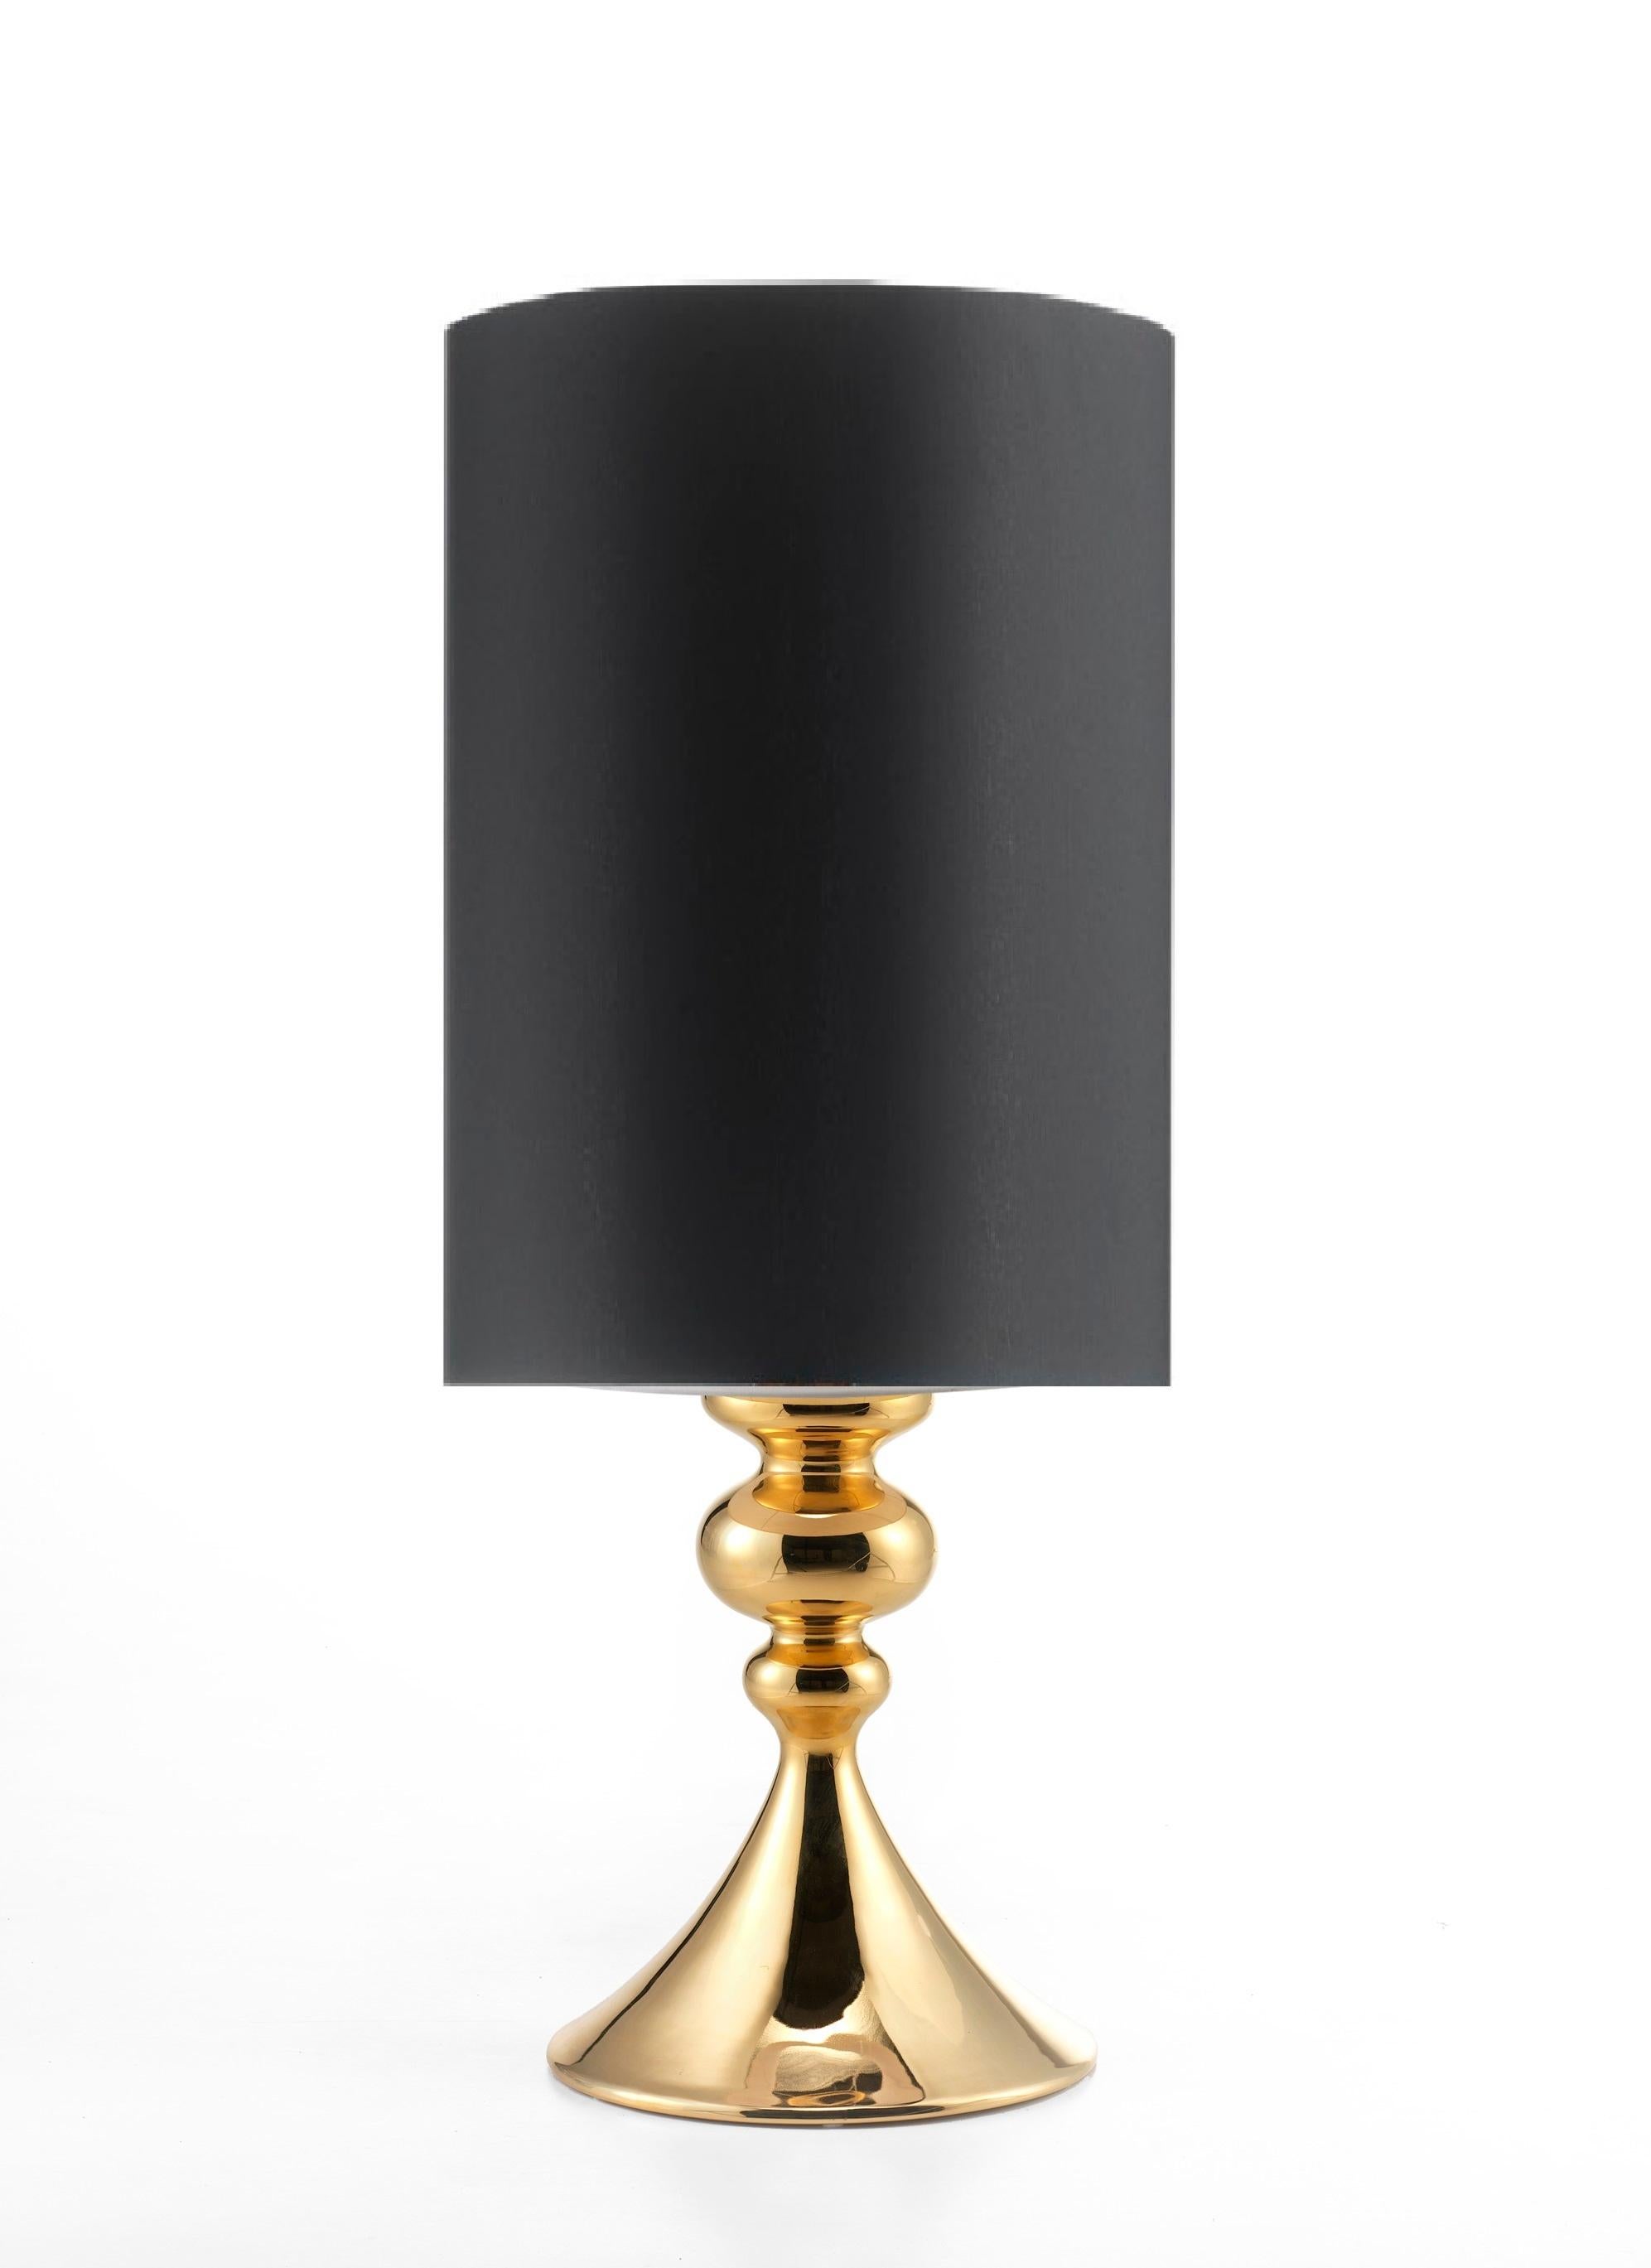 Hand-Crafted KAY, Ceramic Lamp Handcrafted in 24-Karat Gold by Gabriella B. Made in Italy For Sale